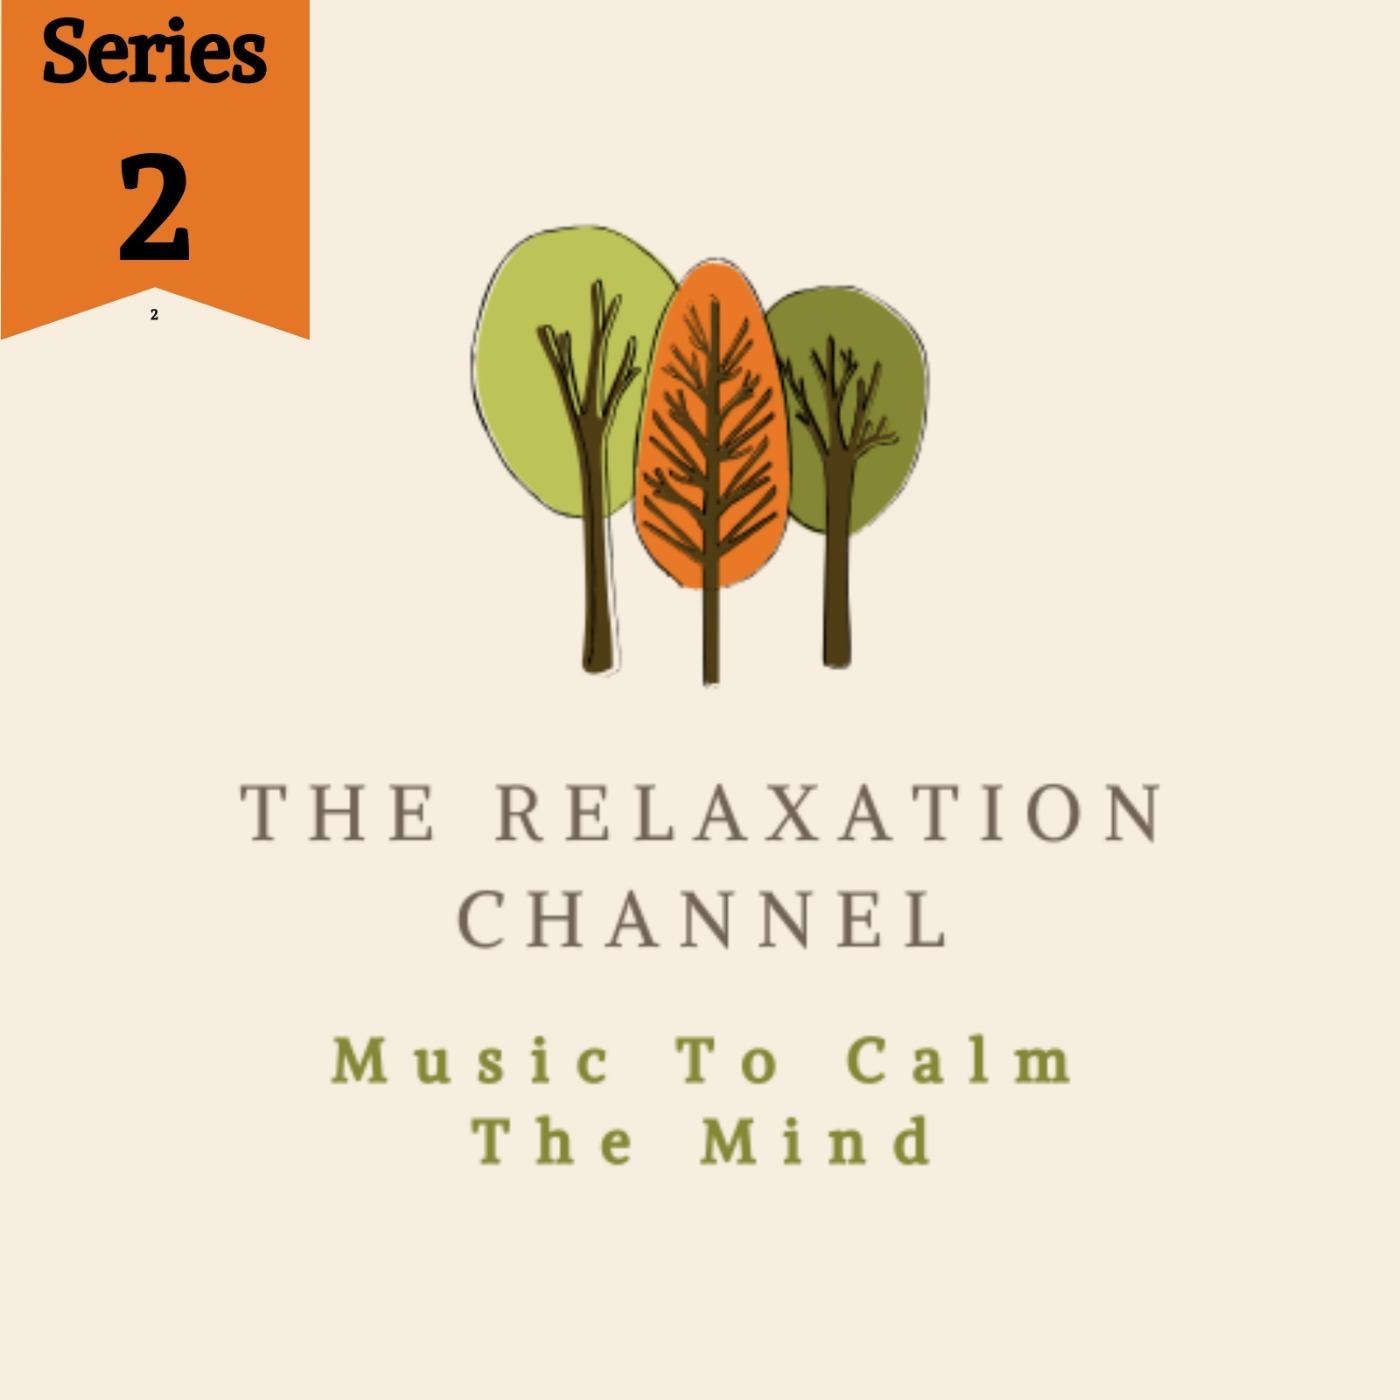 Music To Calm The Mind Series 2 Episode 3